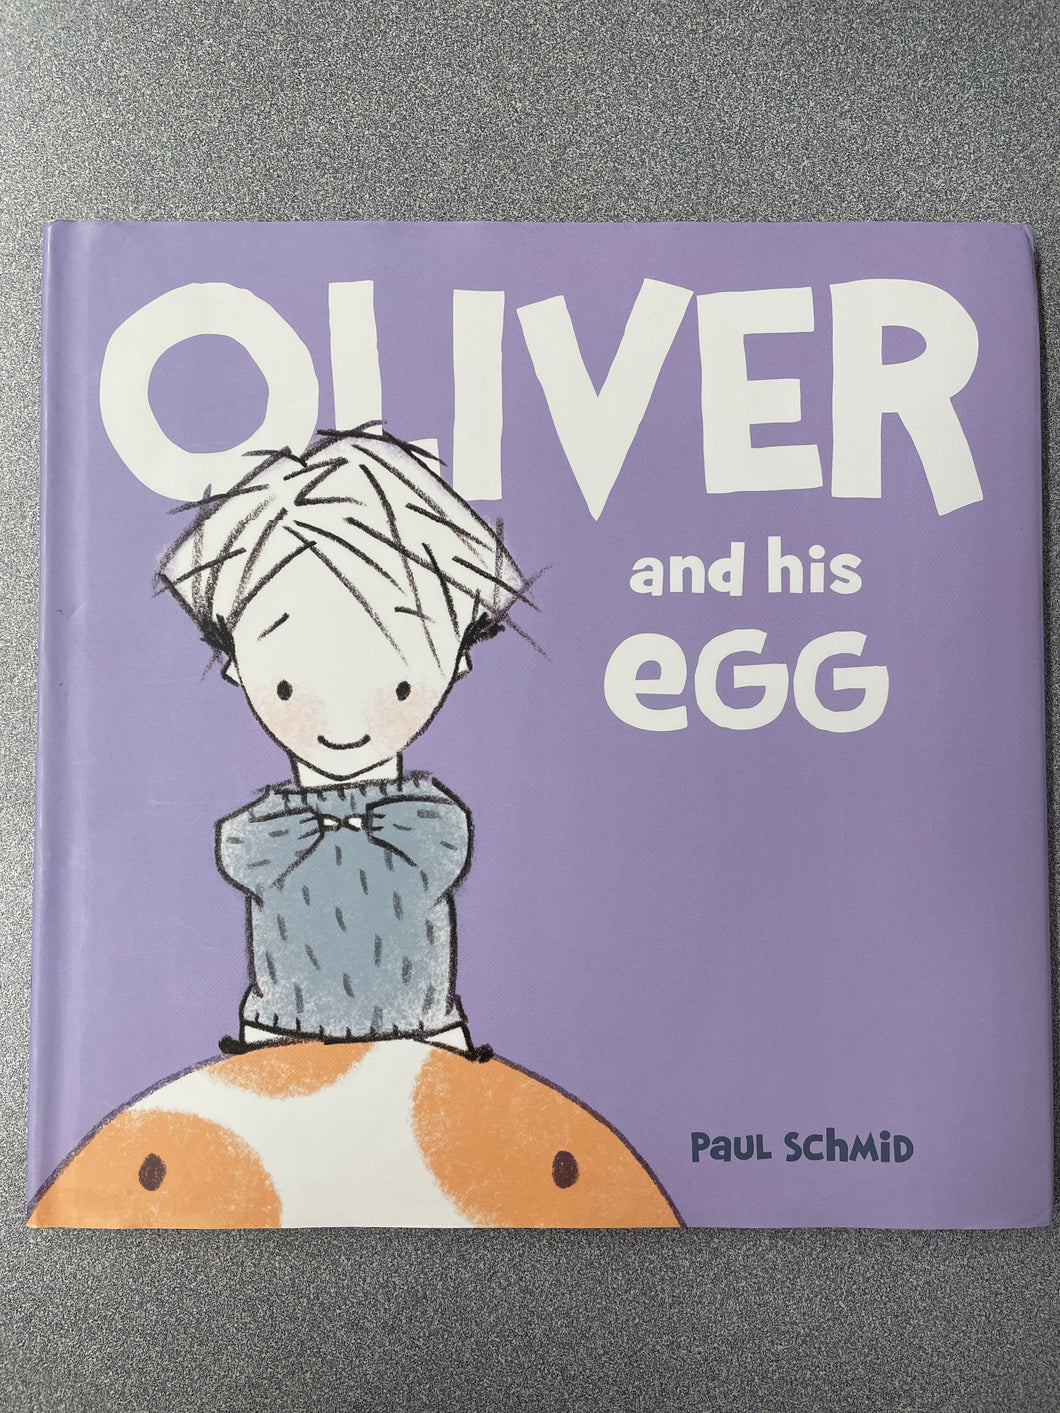 Schmid, Paul, Oliver and his Egg [2014] CP 2/24